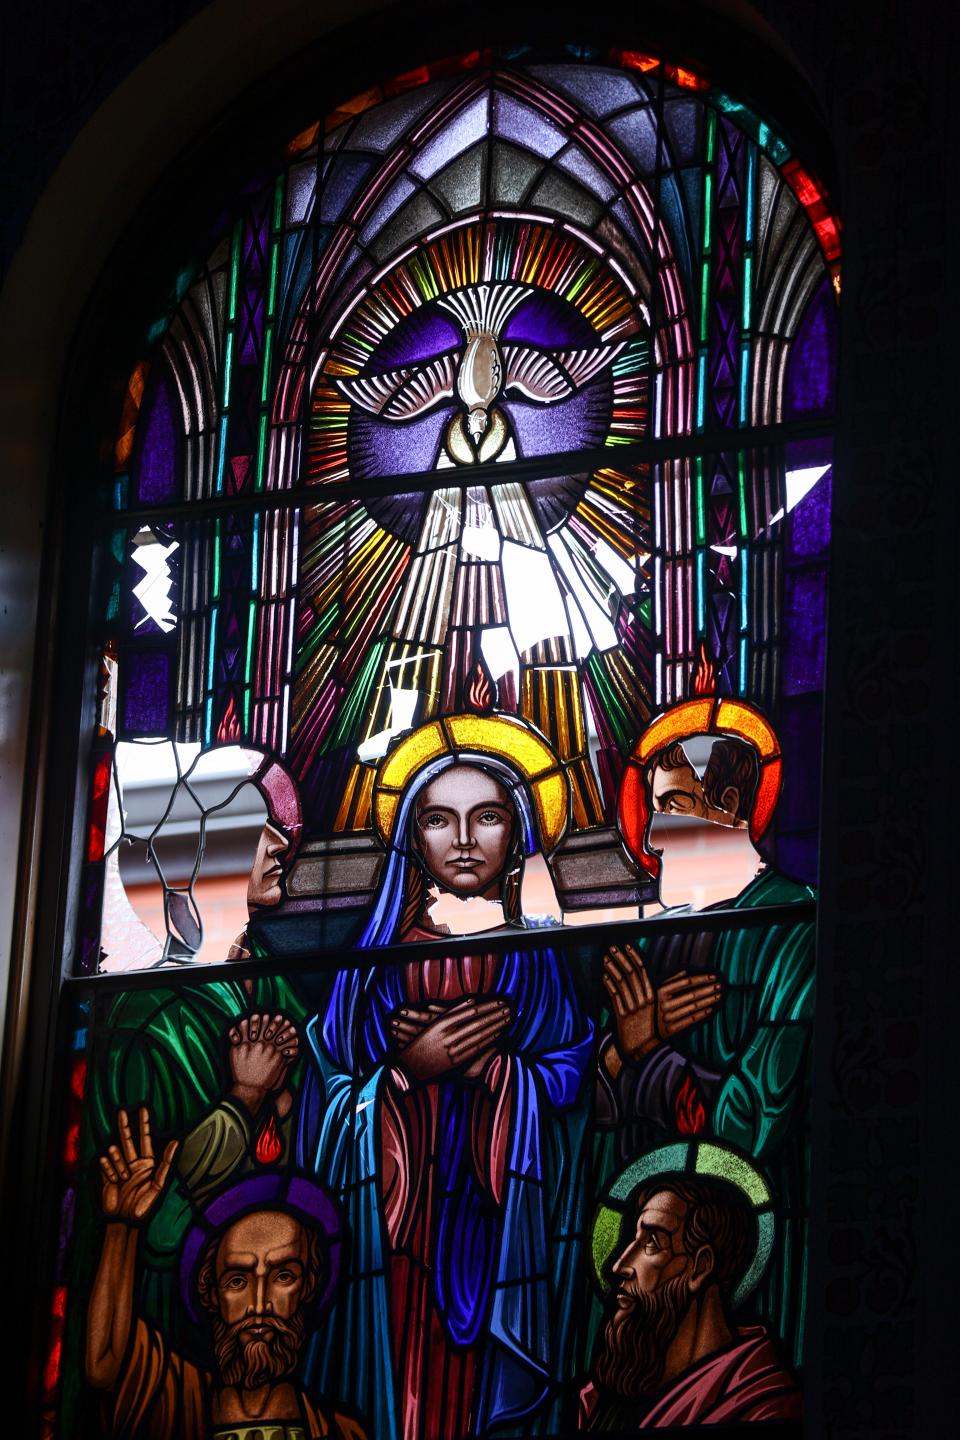 The stained glass window of pentecost after the fire at St. Joseph Catholic Church.